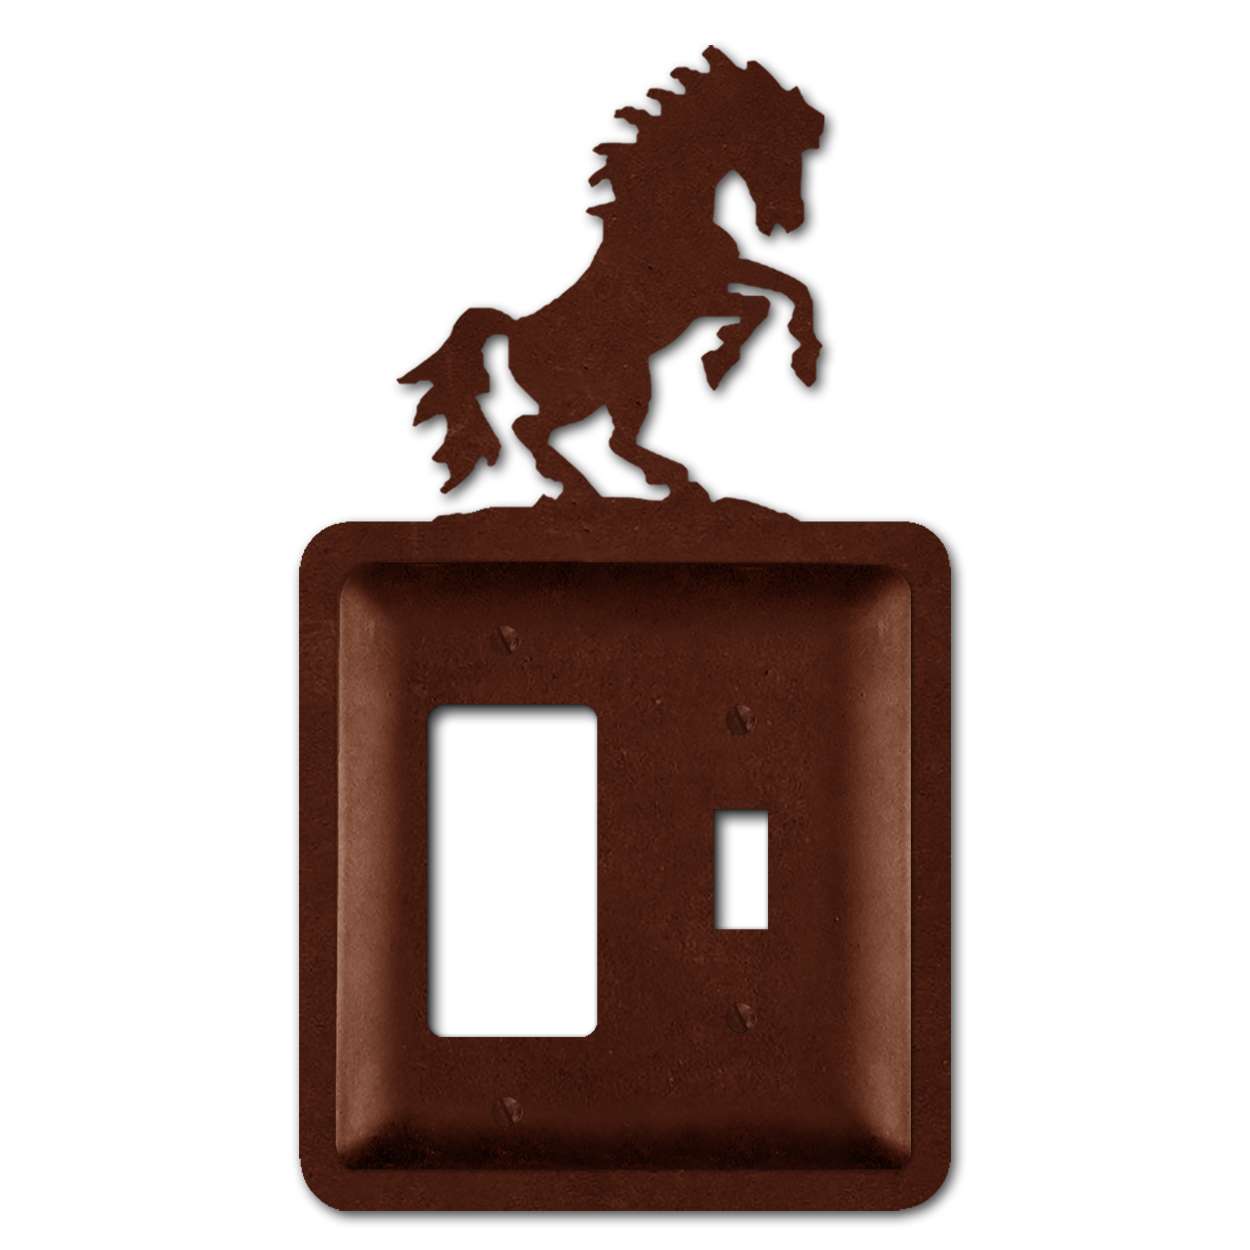 182138RT - Rust Brown 2-Part Metal Wall Plate - Rearing Horse - GFI with Standard Swtch